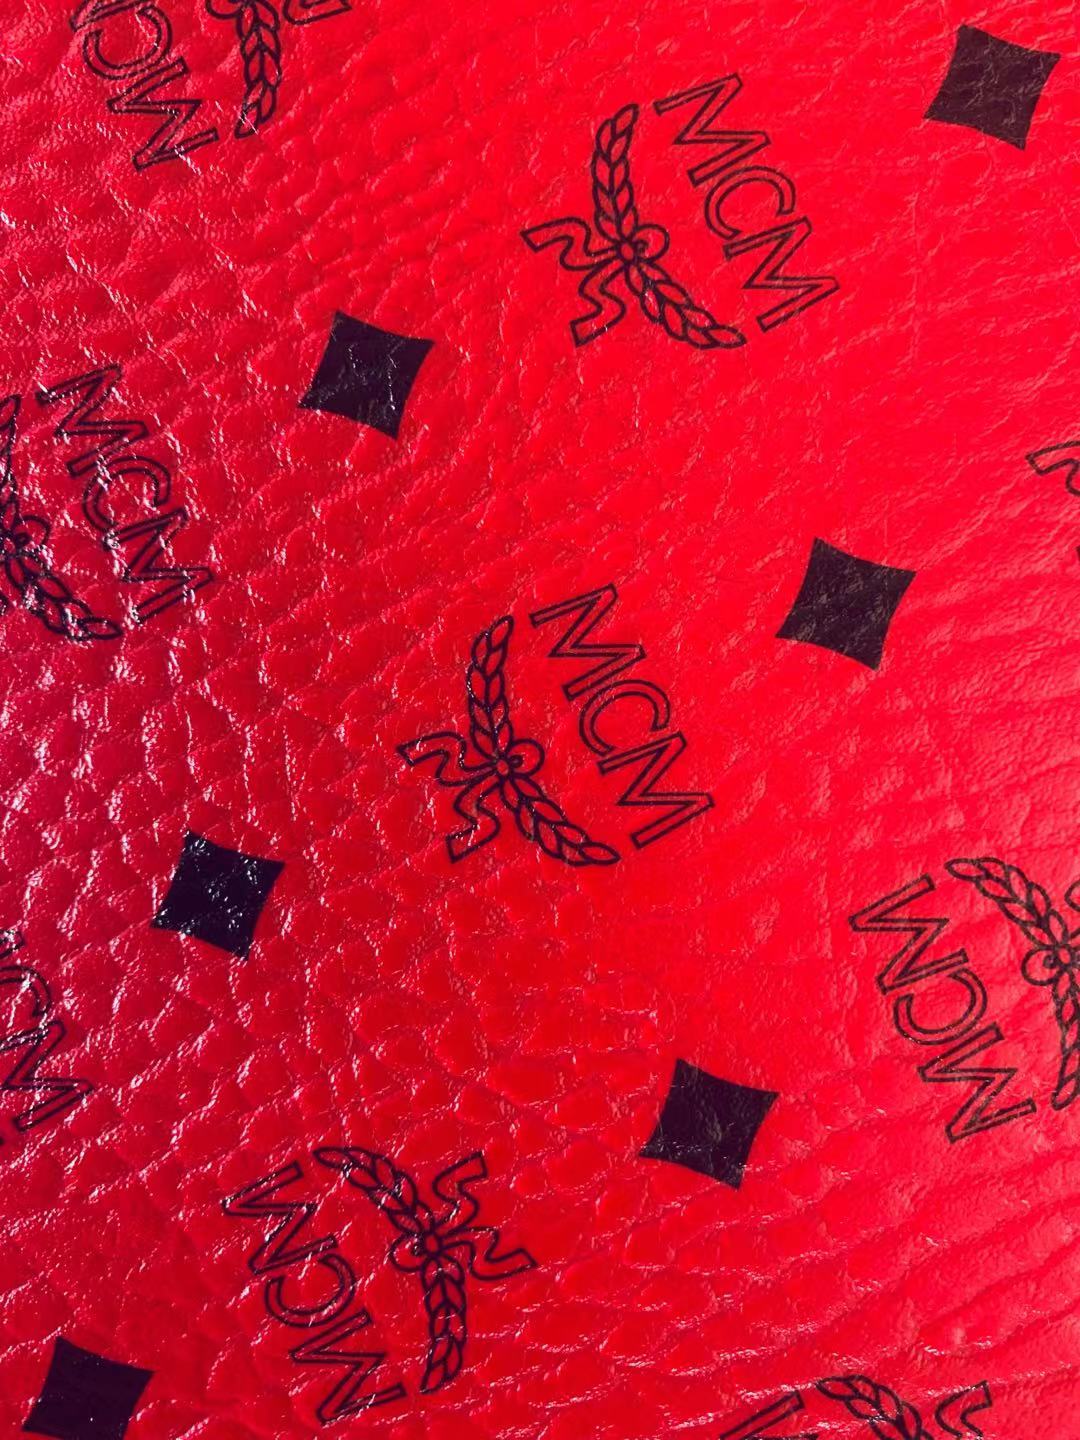 Classic Leather Case Fabric,Handmade Bag Fabric,Hand-made Shoes Fabric (Red)